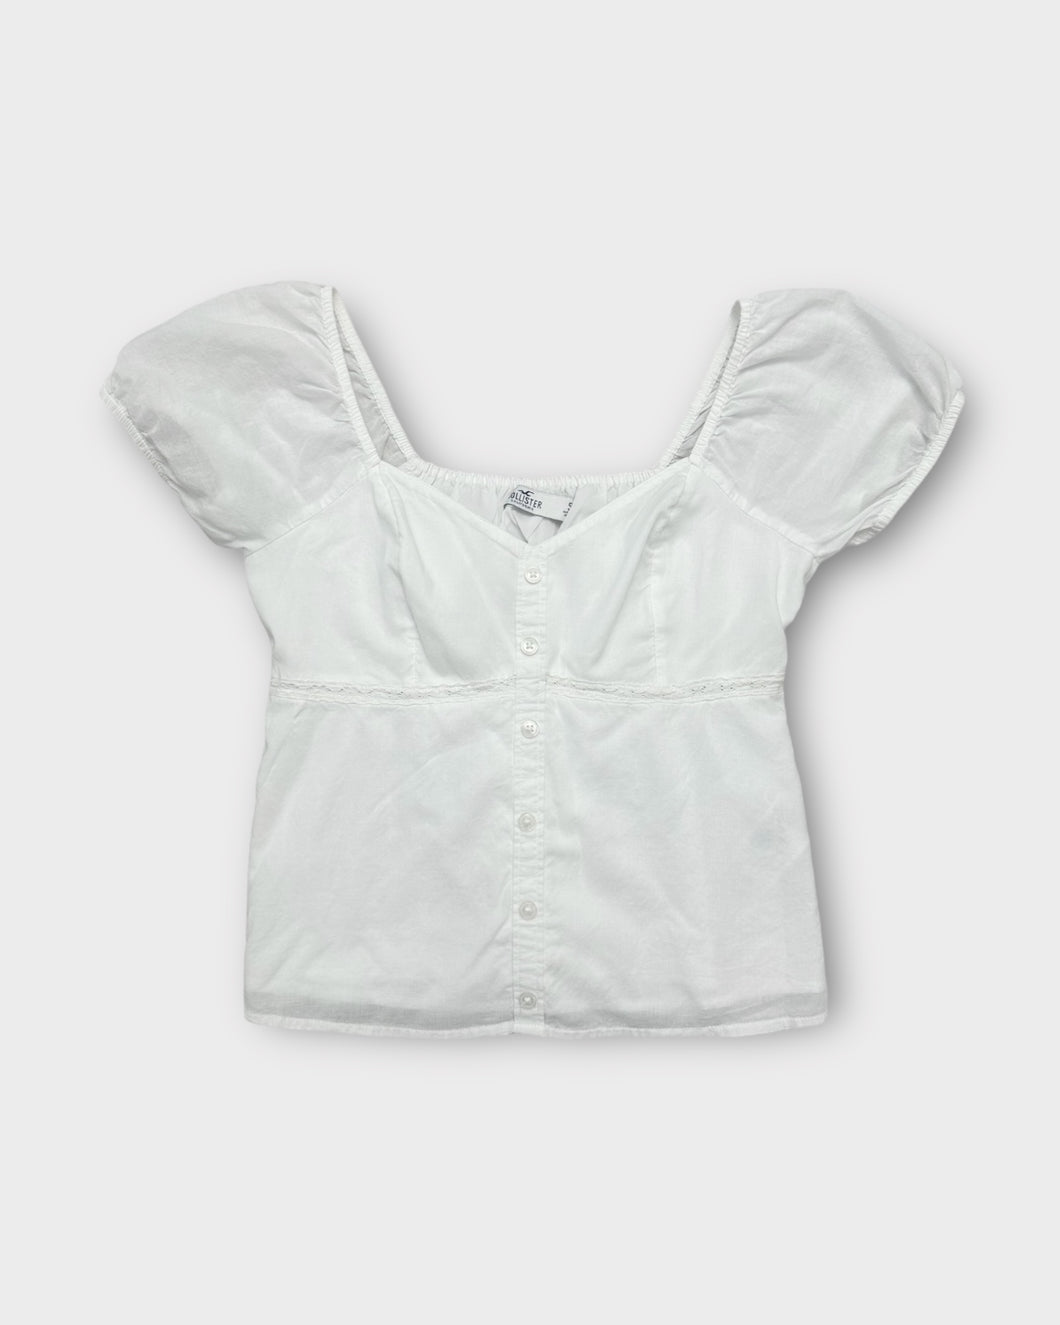 Hollister White Babydoll Top (S)